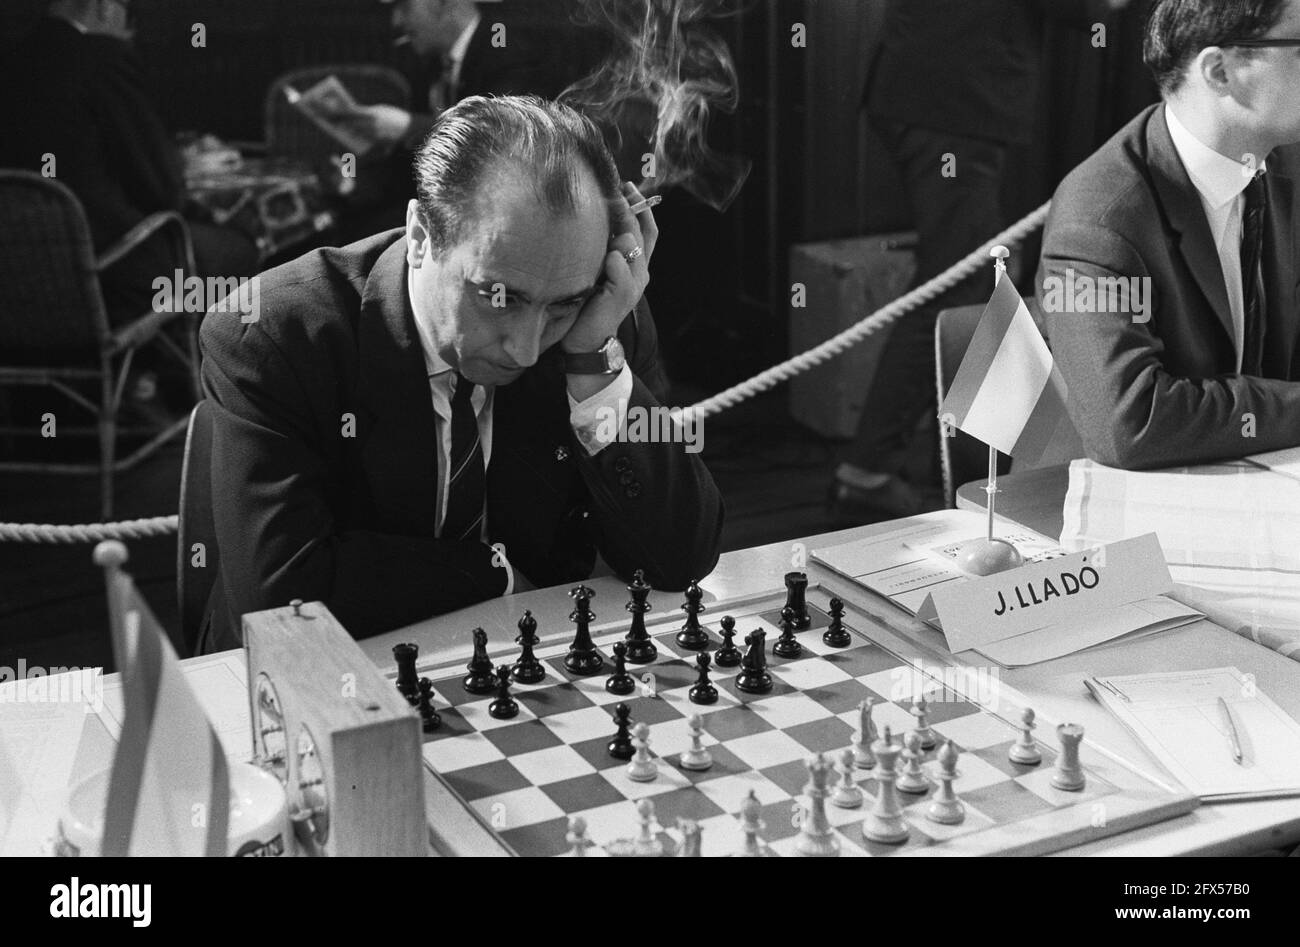 Fide chess tournament. 18-19 Llado, 20-21 J. Duaro, October 4, 1963, SCHAAKTOURNOODS, The Netherlands, 20th century press agency photo, news to remember, documentary, historic photography 1945-1990, visual stories, human history of the Twentieth Century, capturing moments in time Stock Photo